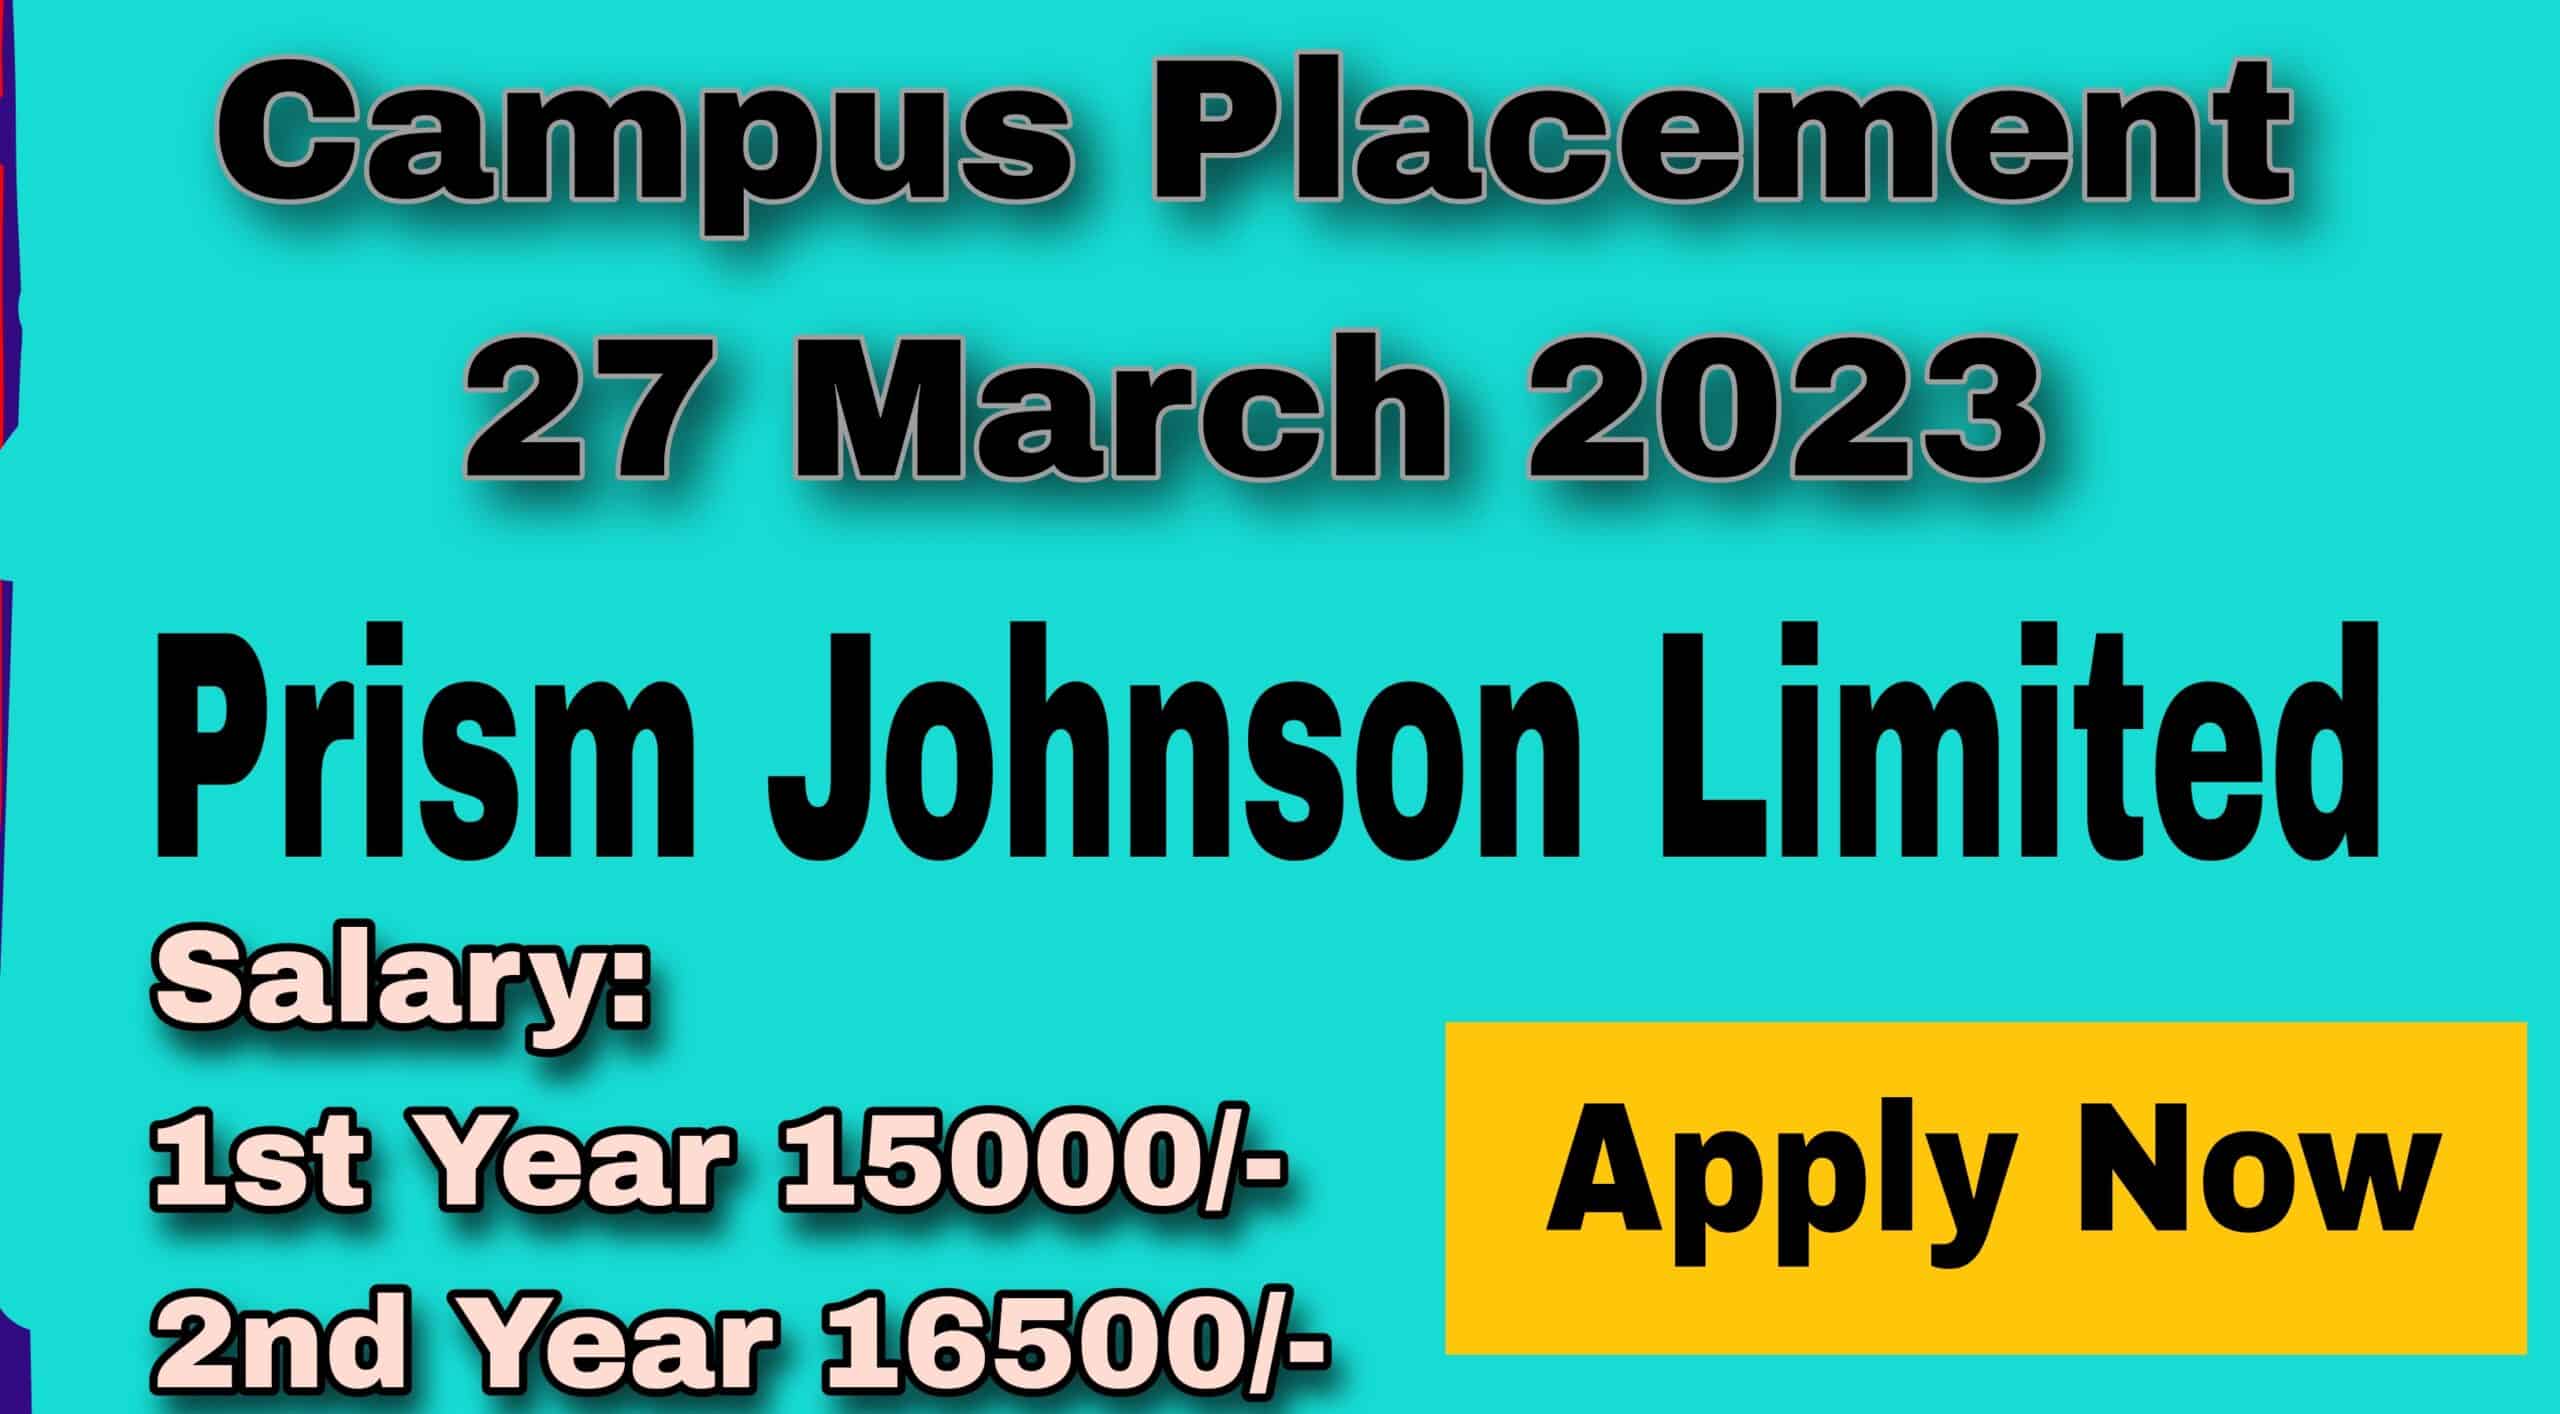 Prism Johnson Limited Company job | Campus Placement